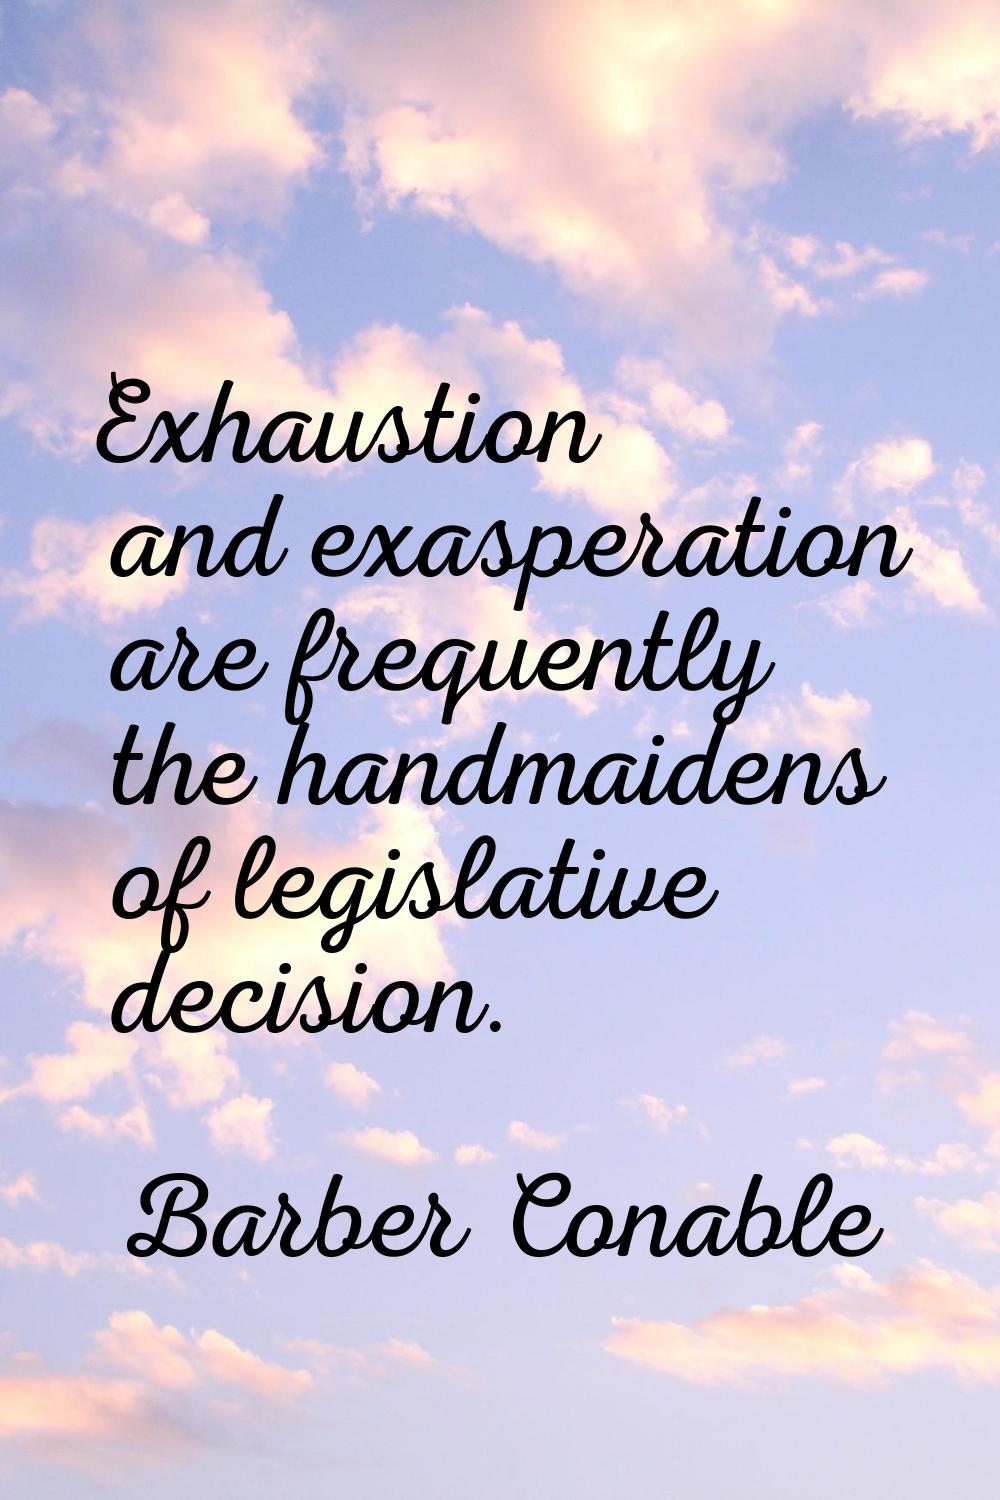 Exhaustion and exasperation are frequently the handmaidens of legislative decision.